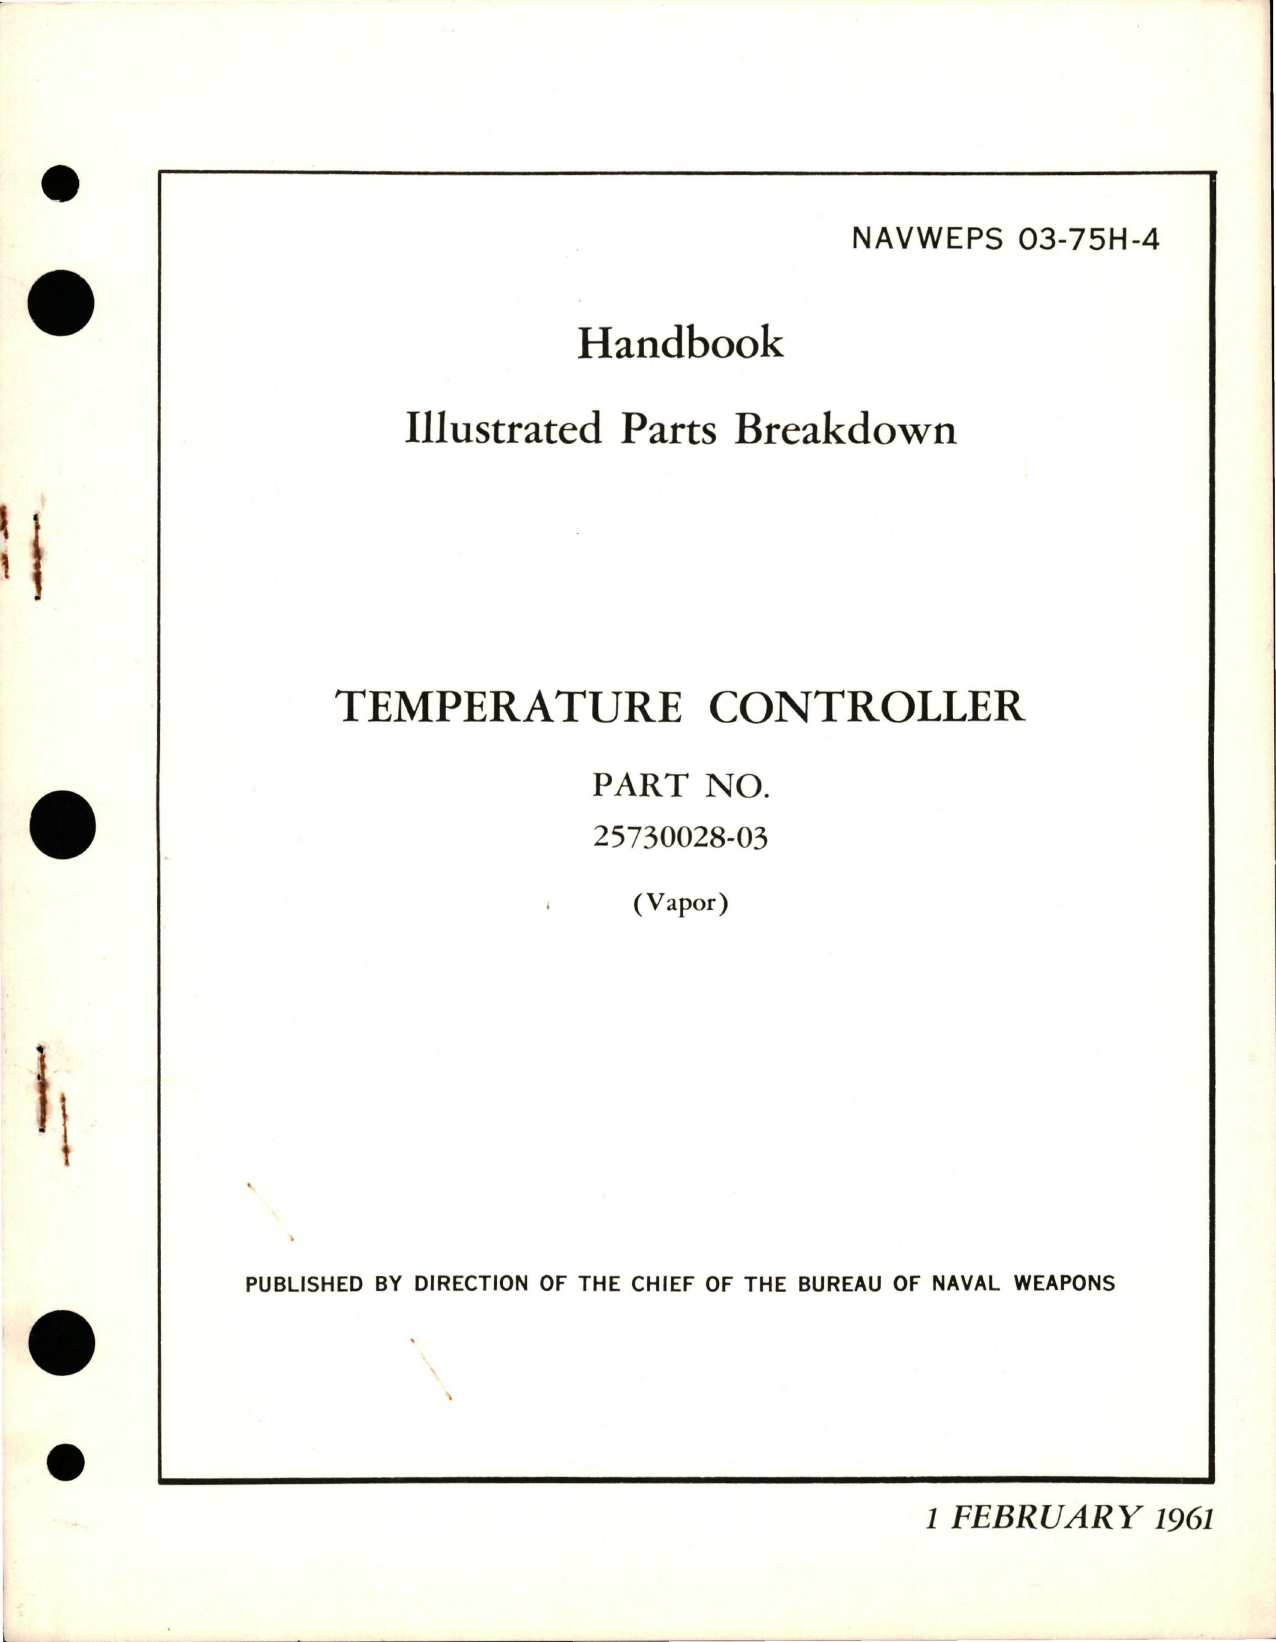 Sample page 1 from AirCorps Library document: Illustrated Parts Breakdown for Temperature Controller - Part 25730028-03